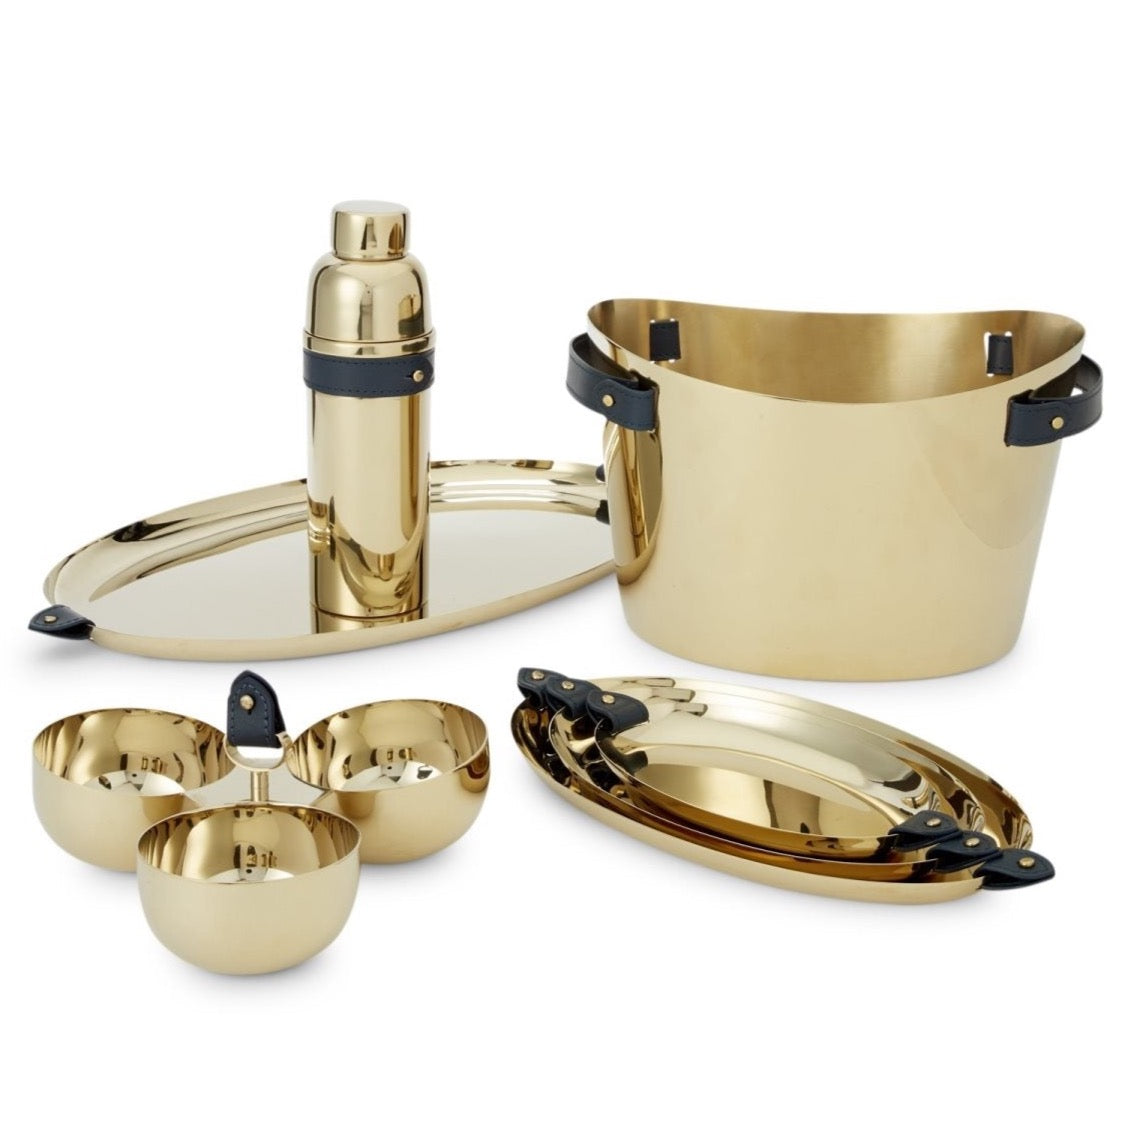 Double Gold and Navy Wyatt Champagne Bucket